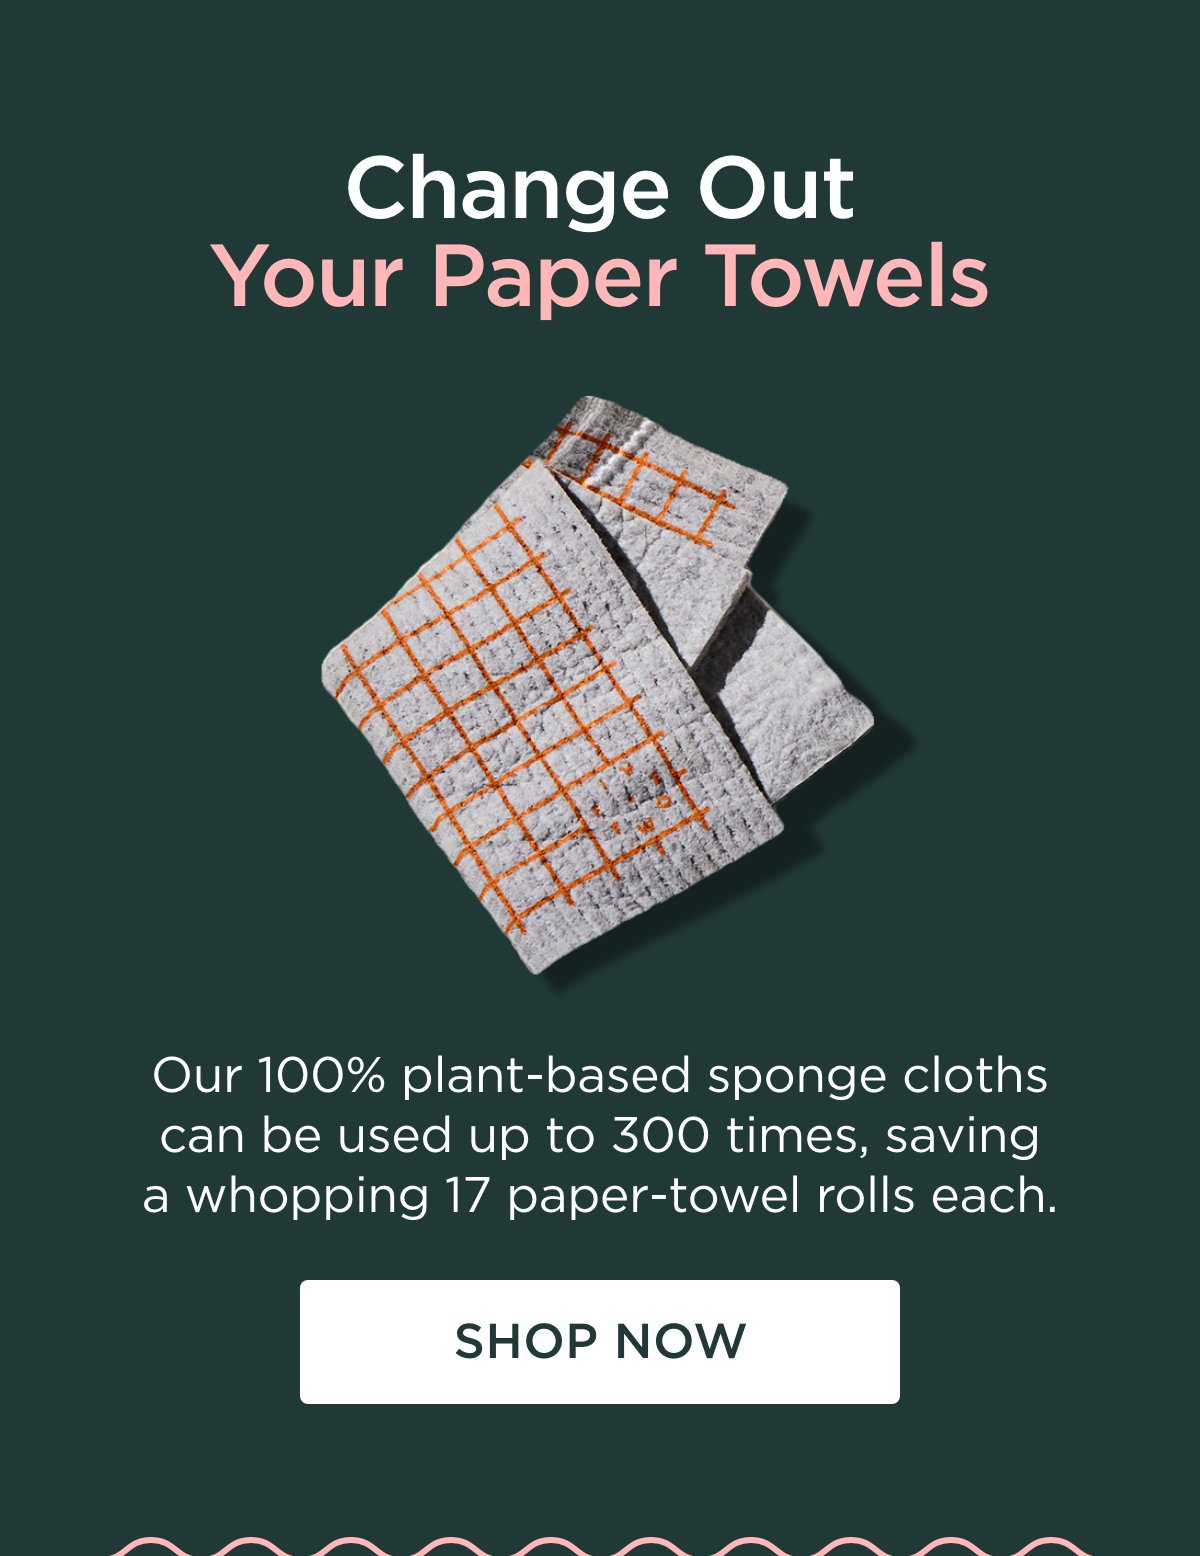 Change Out Your Paper Towels